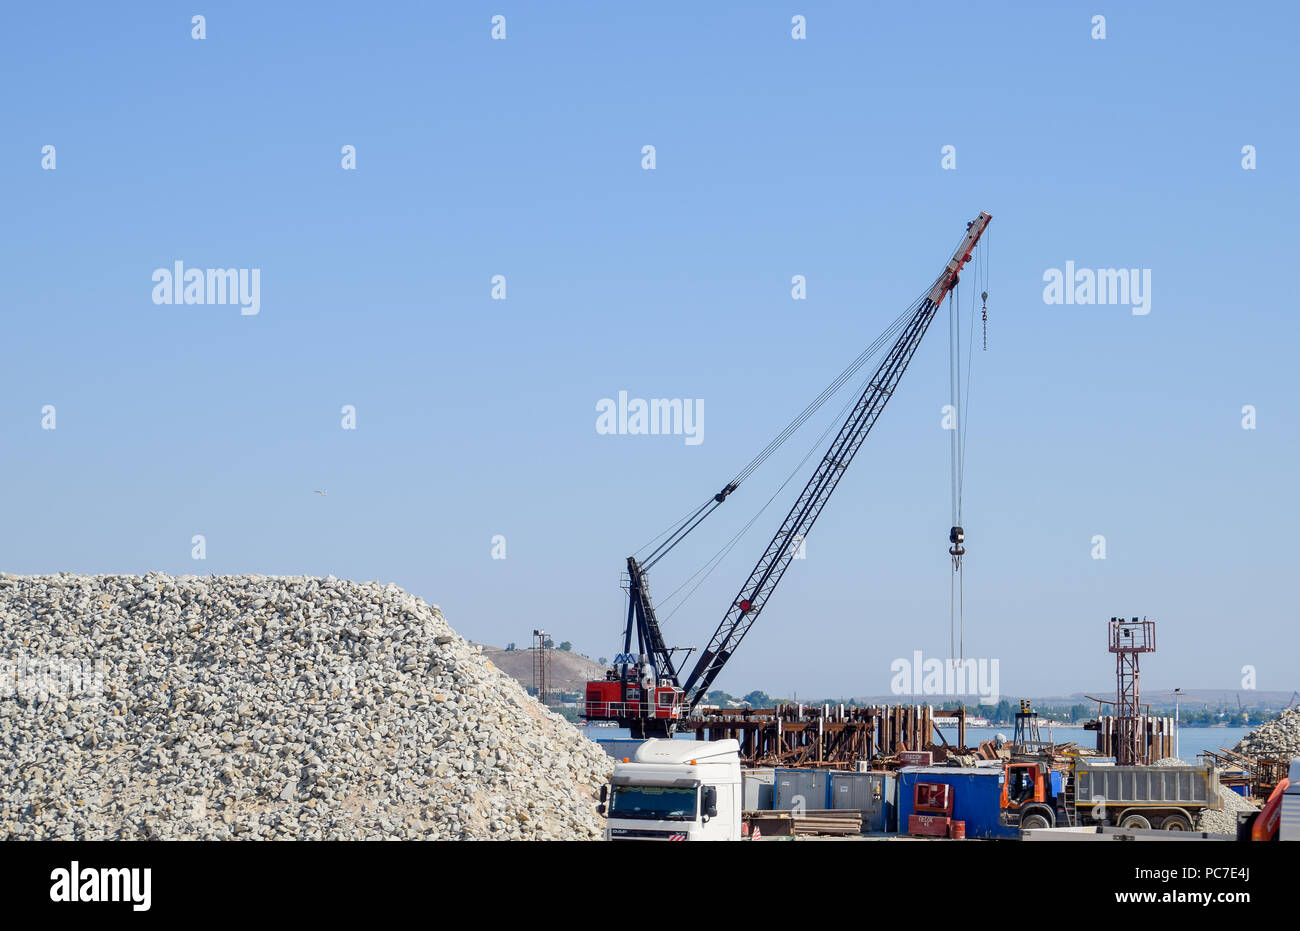 Crimean bridge, Taman, Russia - July 9, 2018: Construction of the Crimean bridge. Piles of rubble and cranes lifted. Construction and repair. Driving  Stock Photo